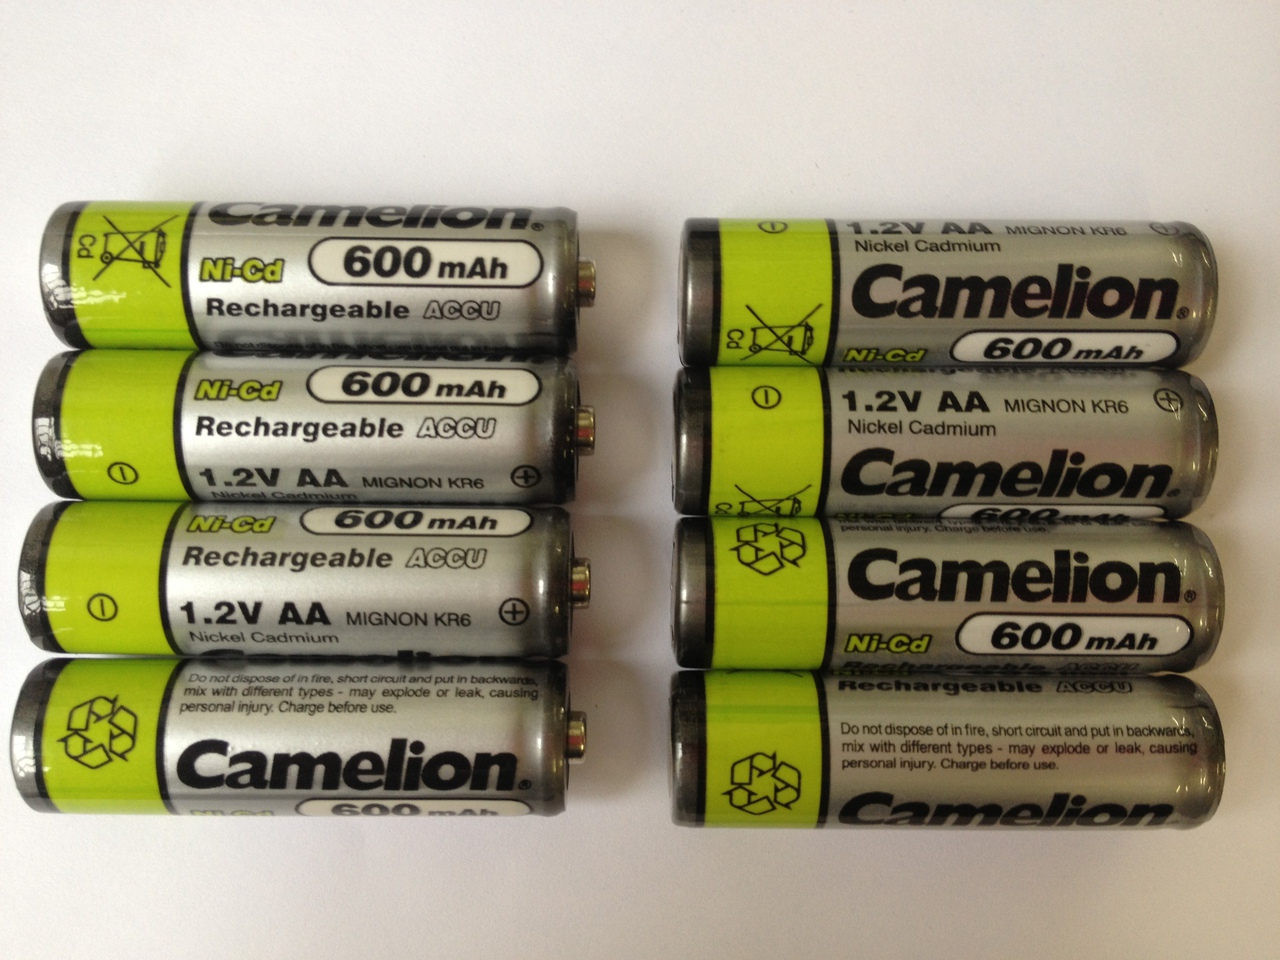 Camelion AA Rechargeable NiCD Batteries 600mAH 8 Pack + FREE SHIPPING!